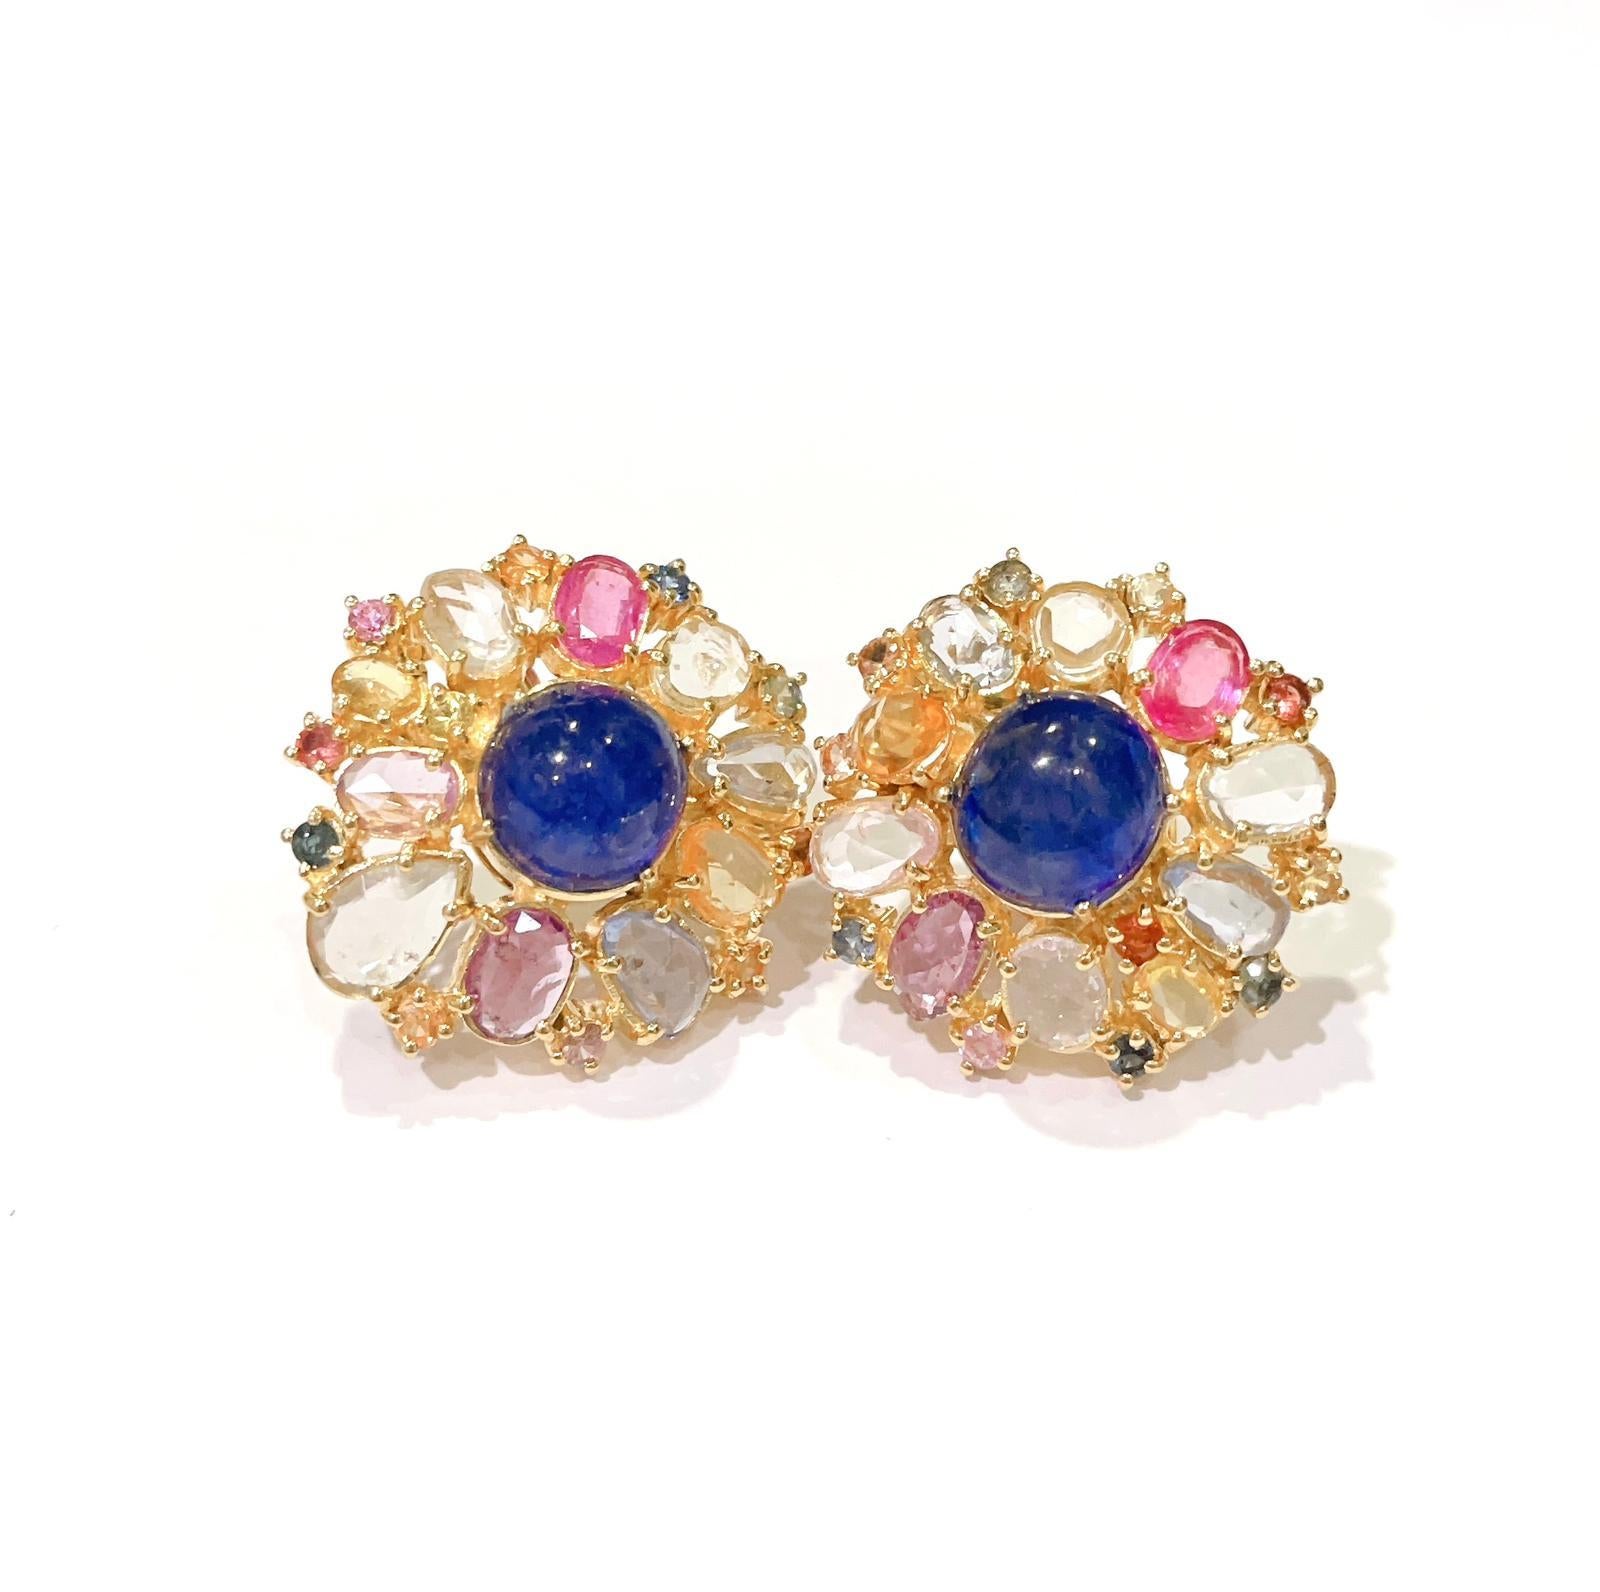 Bochic “Capri” Blue Sapphire, Ruby & Rose Cut Sapphire Earrings Set In 18K Gold & Silver 
From the “Capri” collection 
Natural Blue Sapphire Cabochons - 20 carats 
Cabochon Round shapes 
Natural Ruby Pink Red  - 2 carats 
Oval shapes 
Natural Fancy